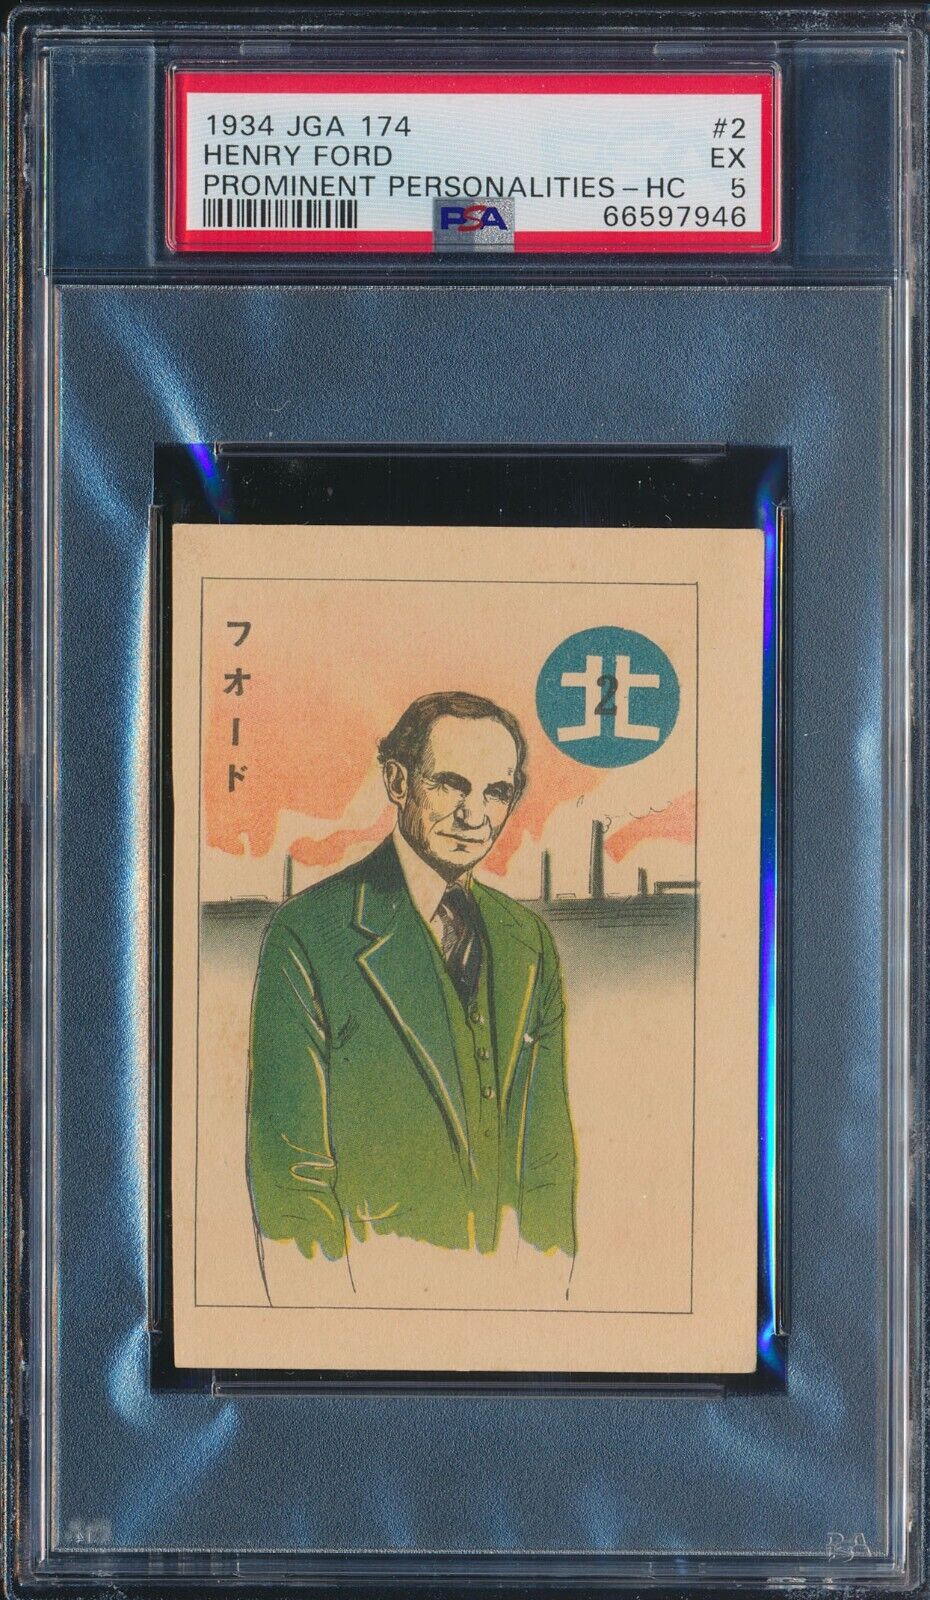 1934 Henry Ford JGA174 Car Automobile Japanese Card PSA 5 Only Graded Example